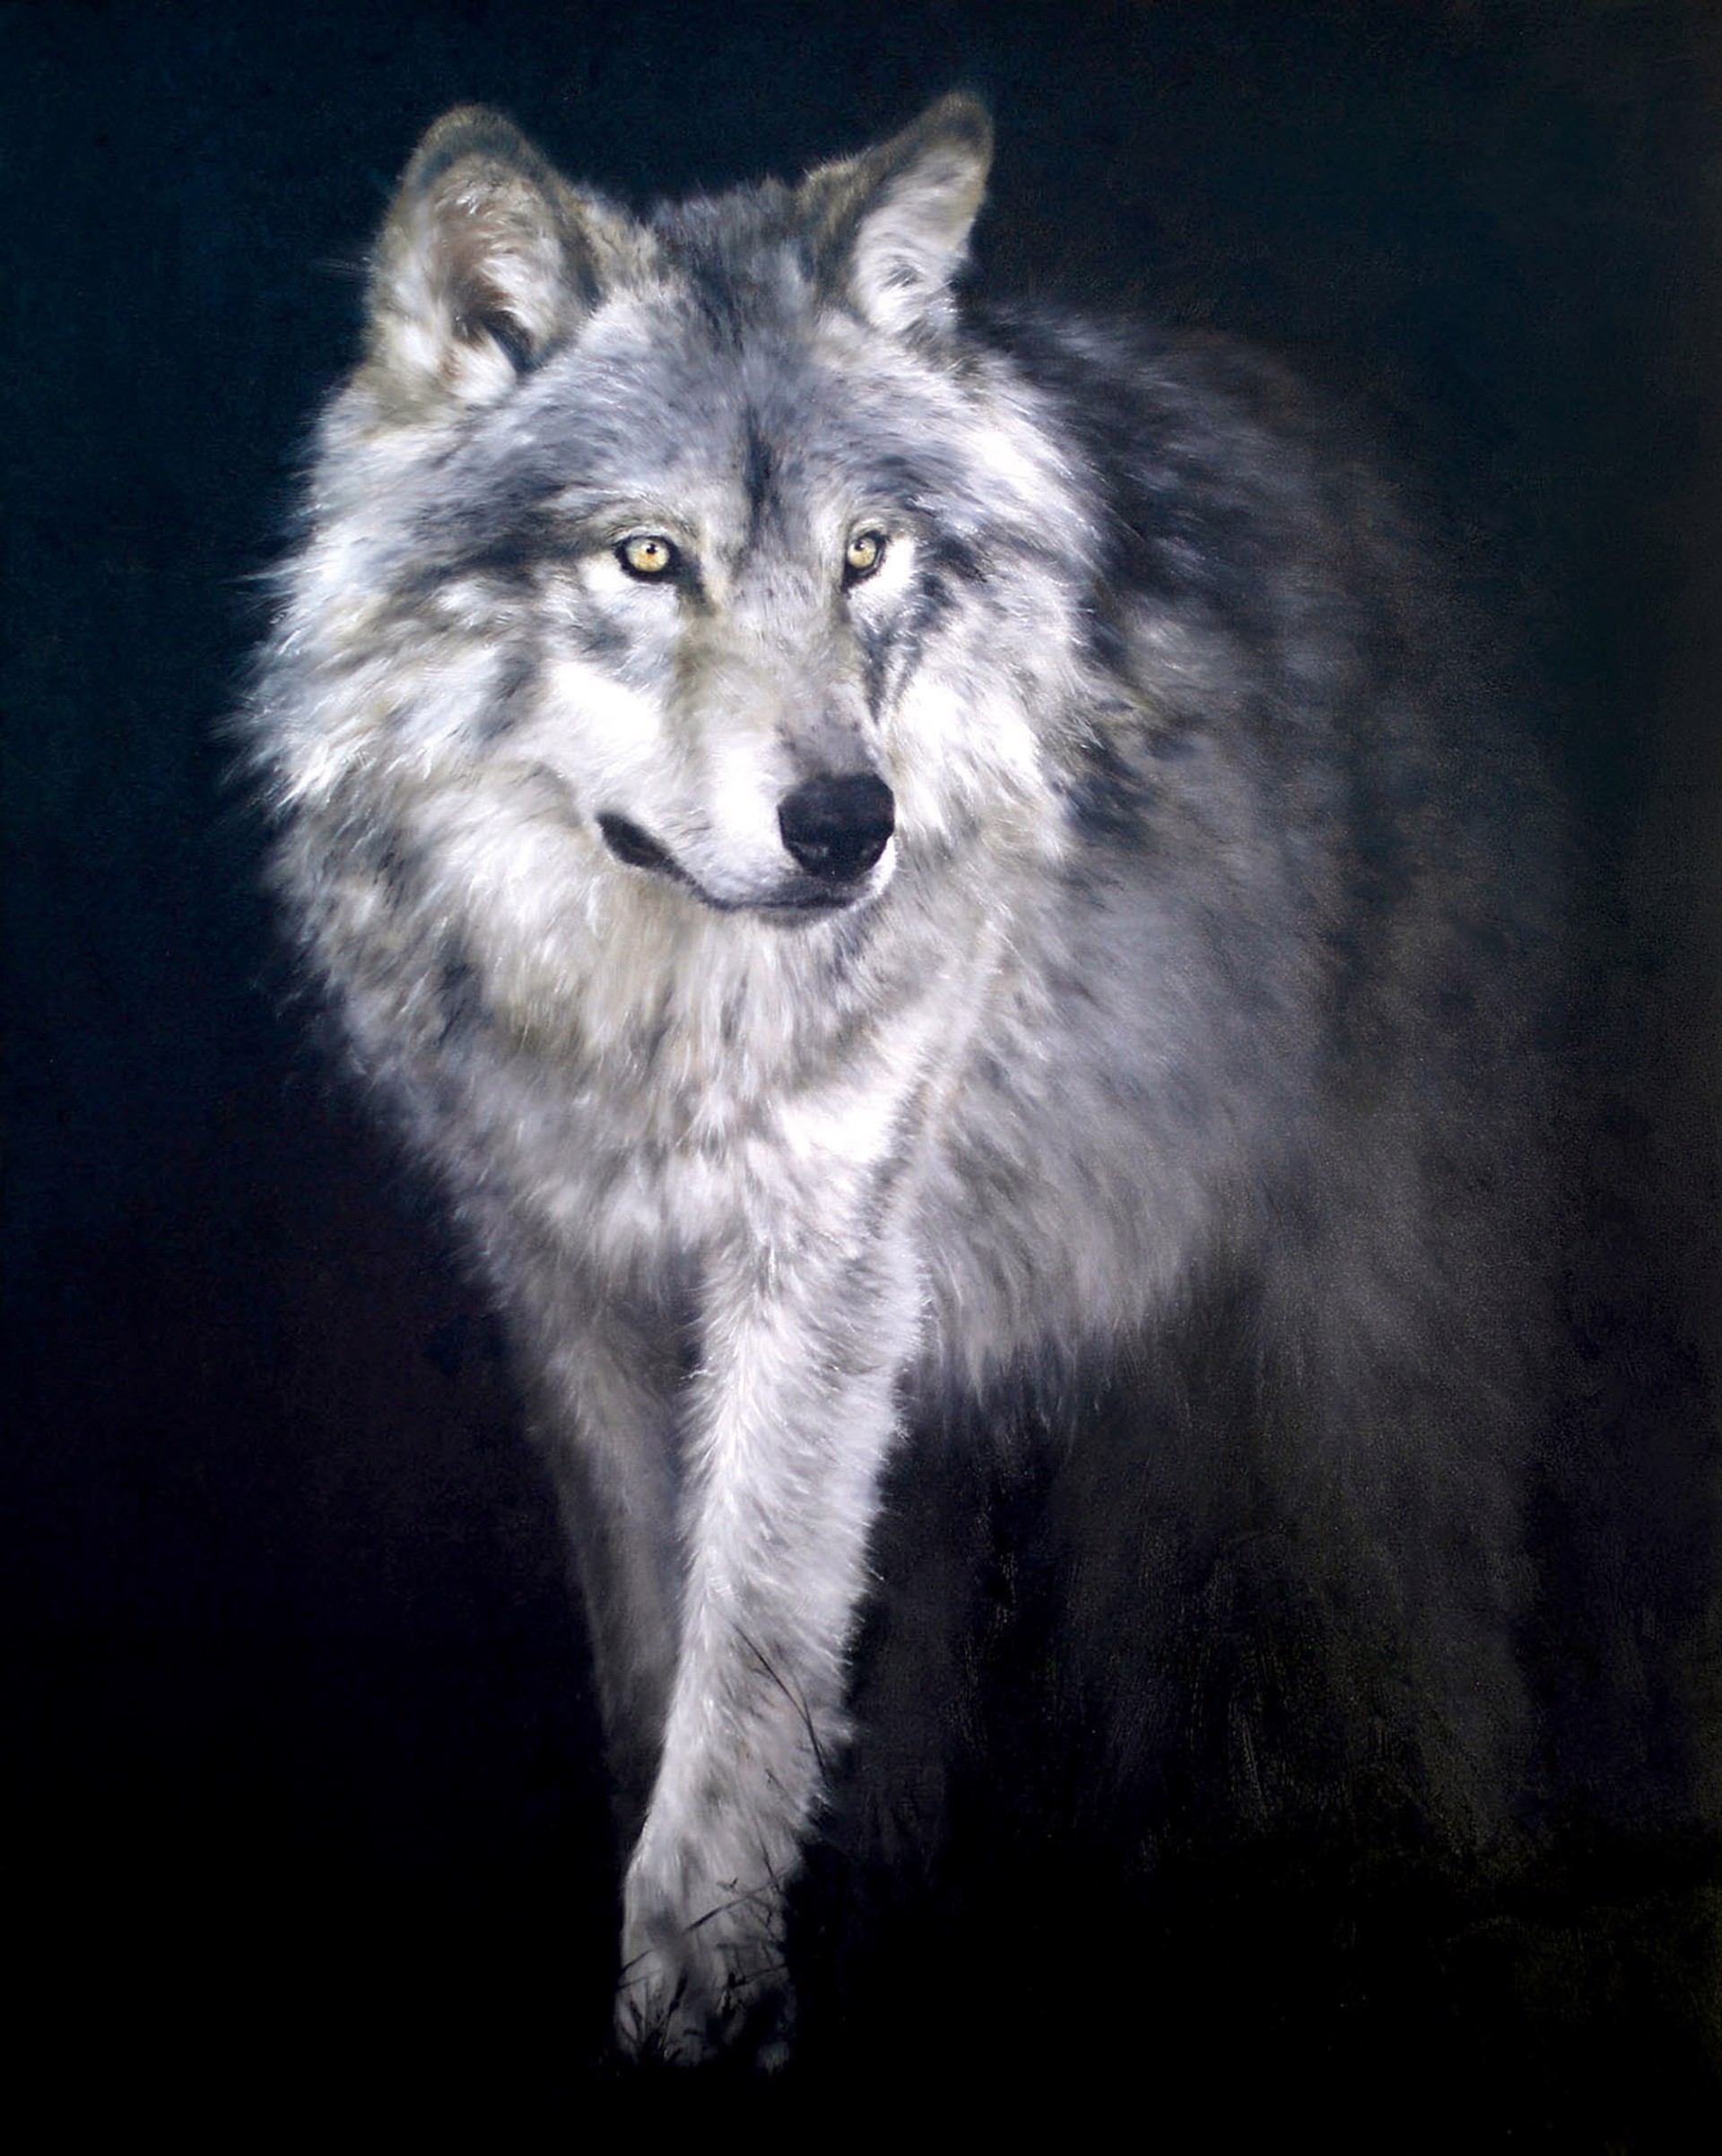 Original Oil Painting Featuring A Gray Wolf Emerging From A Black Background